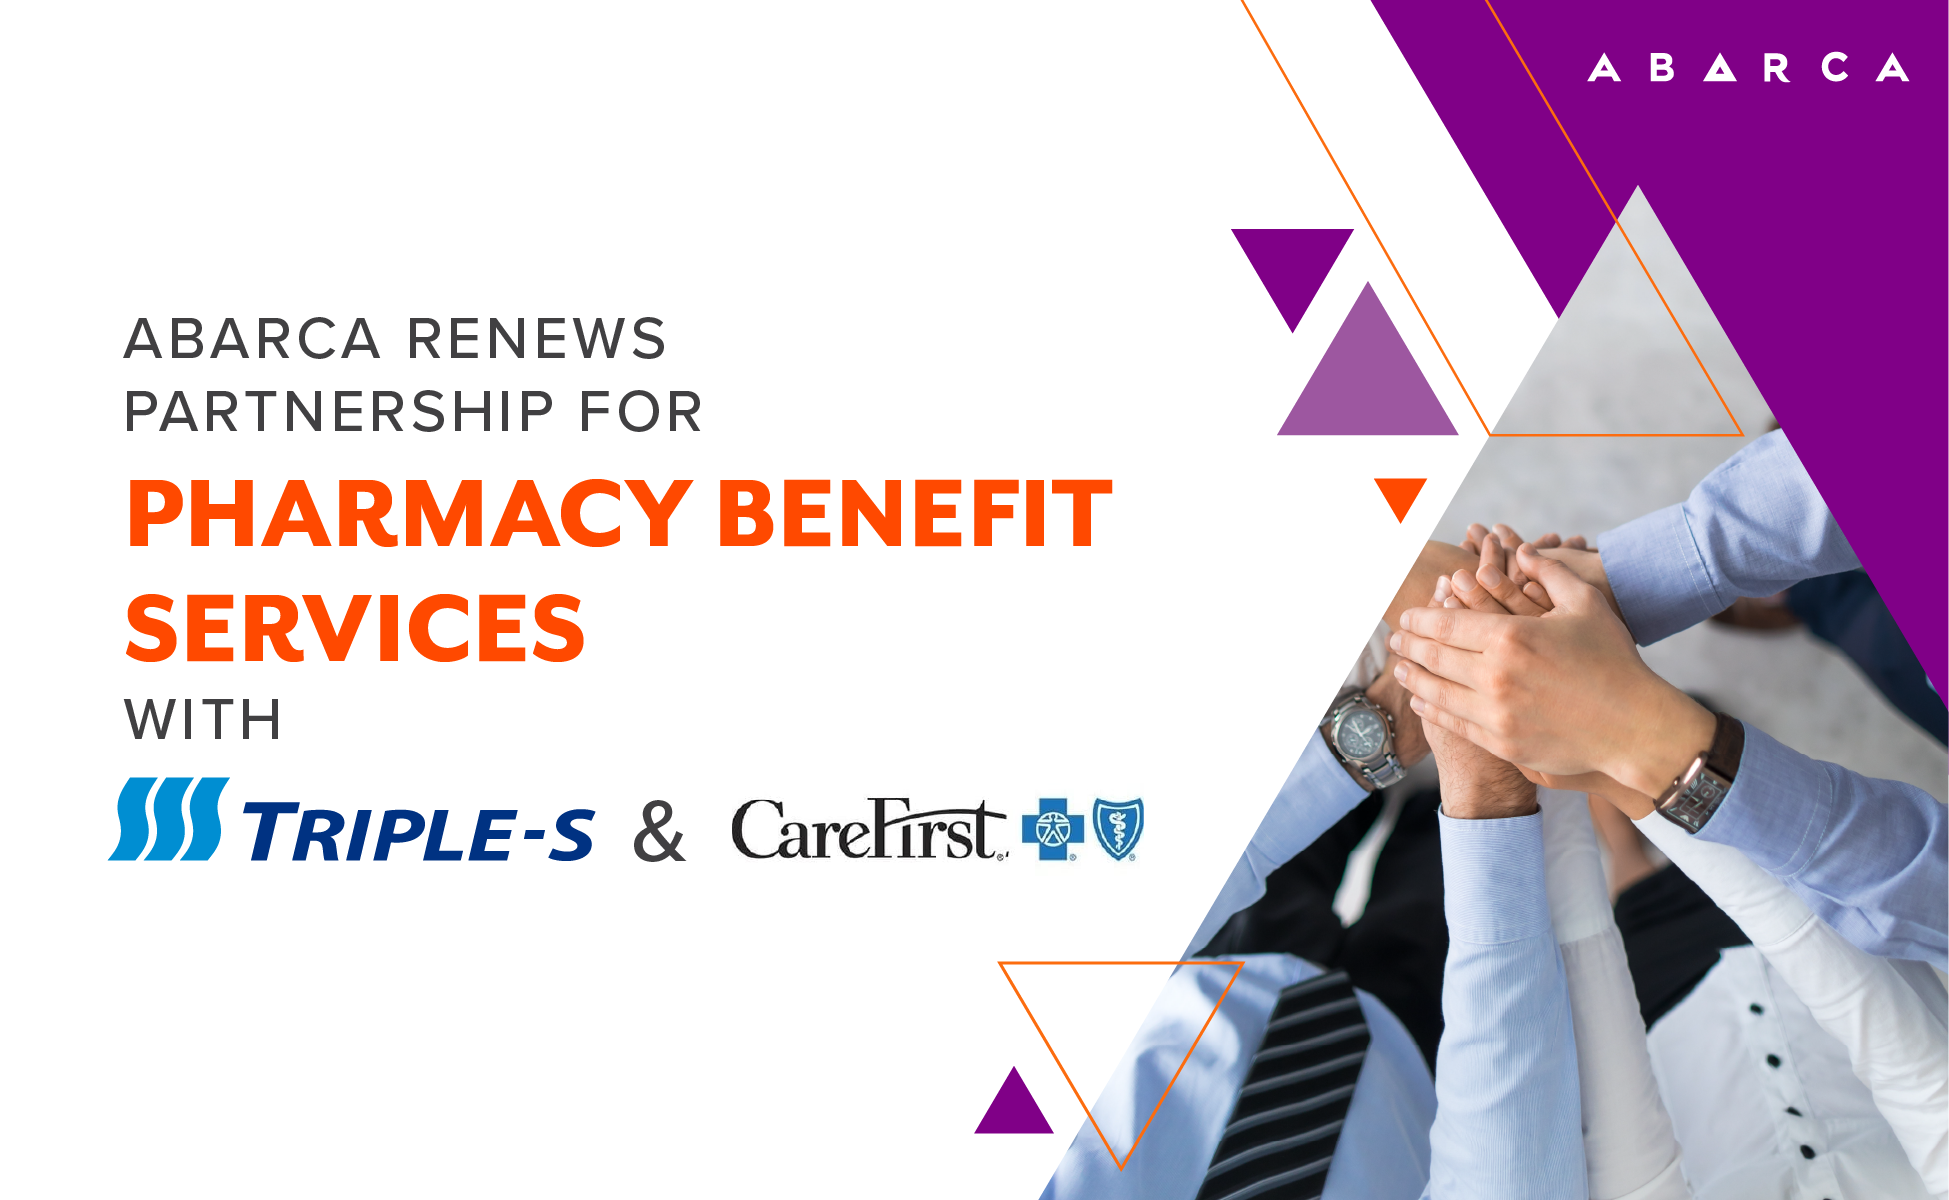 ABARCA RENEWS, EXPANDS PARTNERSHIPS FOR PHARMACY BENEFIT SERVICES WITH TRIPLE-S, CAREFIRST